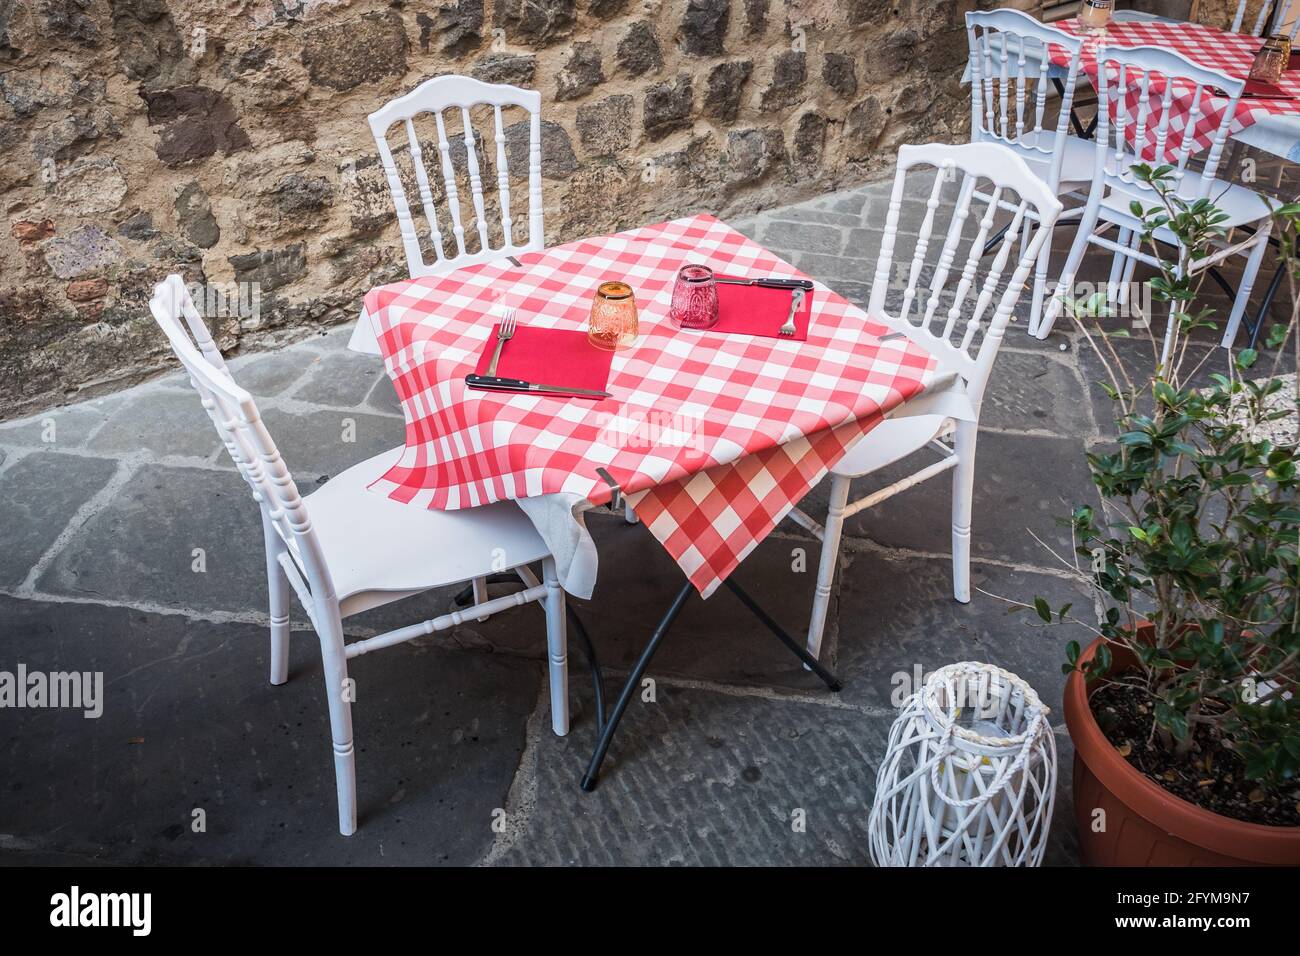 Set Table on a Street in Montalcino, Tuscany, Italy, with Checkered Red and White Tablecloth, in the Old Town Stock Photo